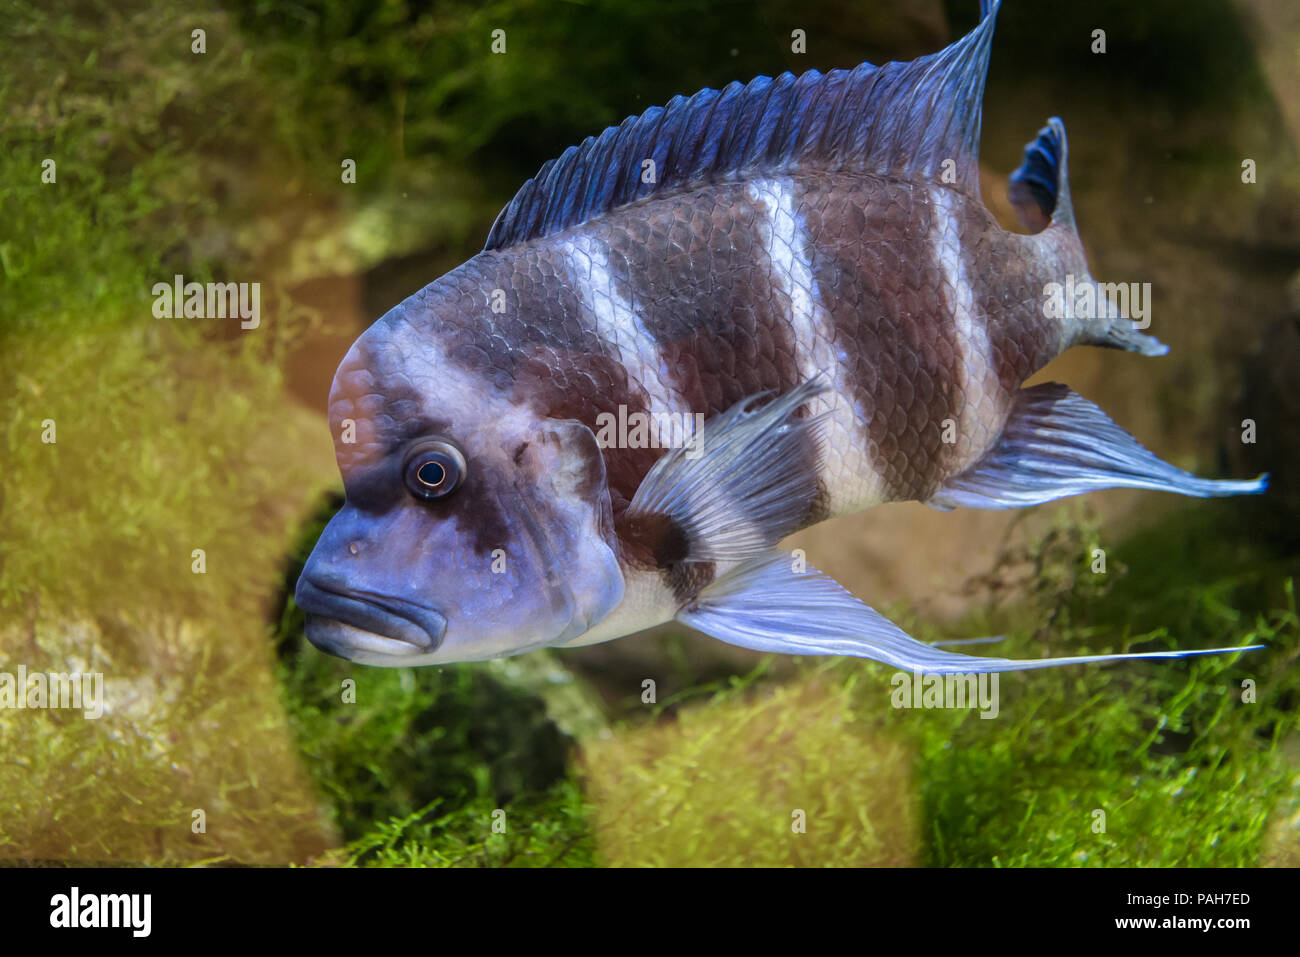 Cyphotilapia frontosa fish endemic to Lake Tanganyika commonly known as The Frontosa Cichlid or Humphead Cichlid Stock Photo